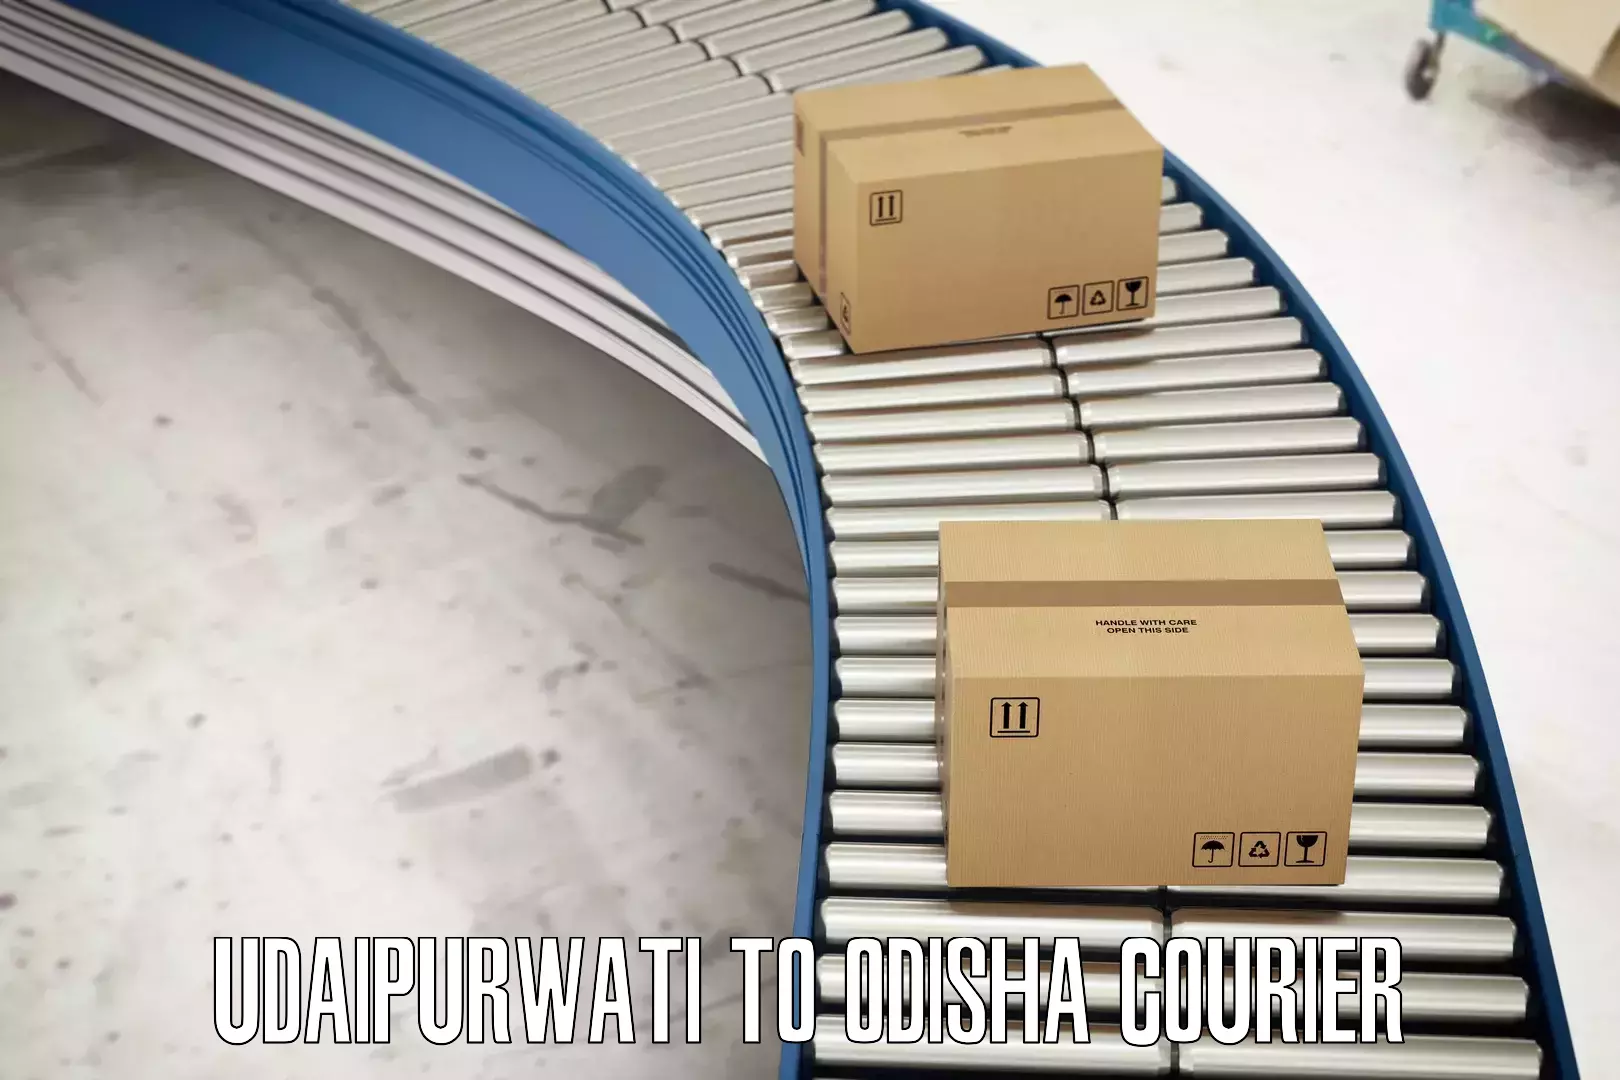 Business shipping needs Udaipurwati to Cuttack